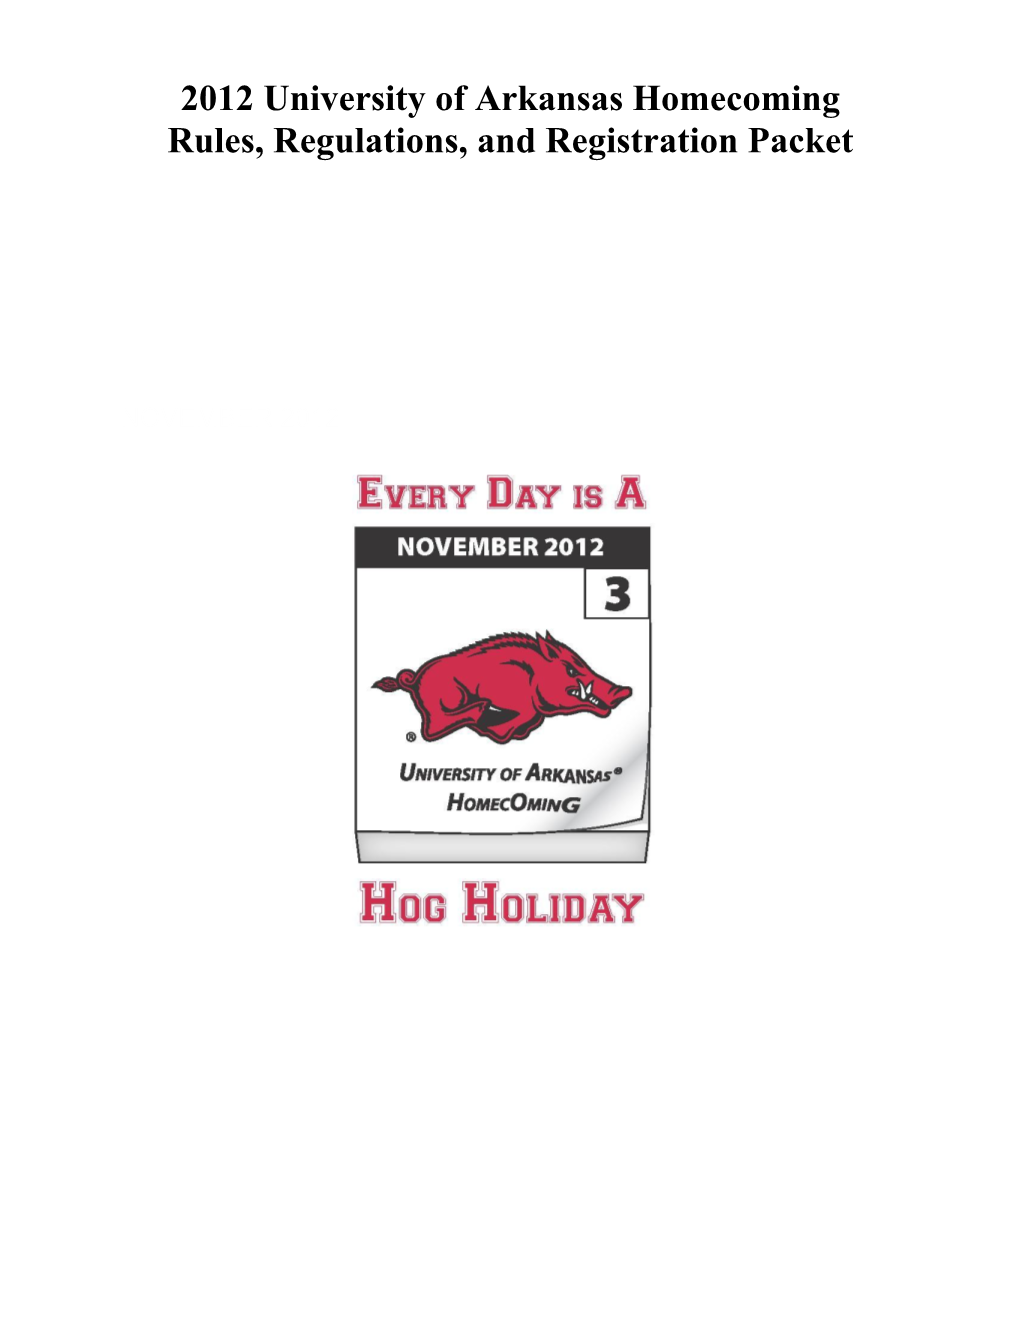 2012 University of Arkansas Homecoming Rules, Regulations, and Registration Packet